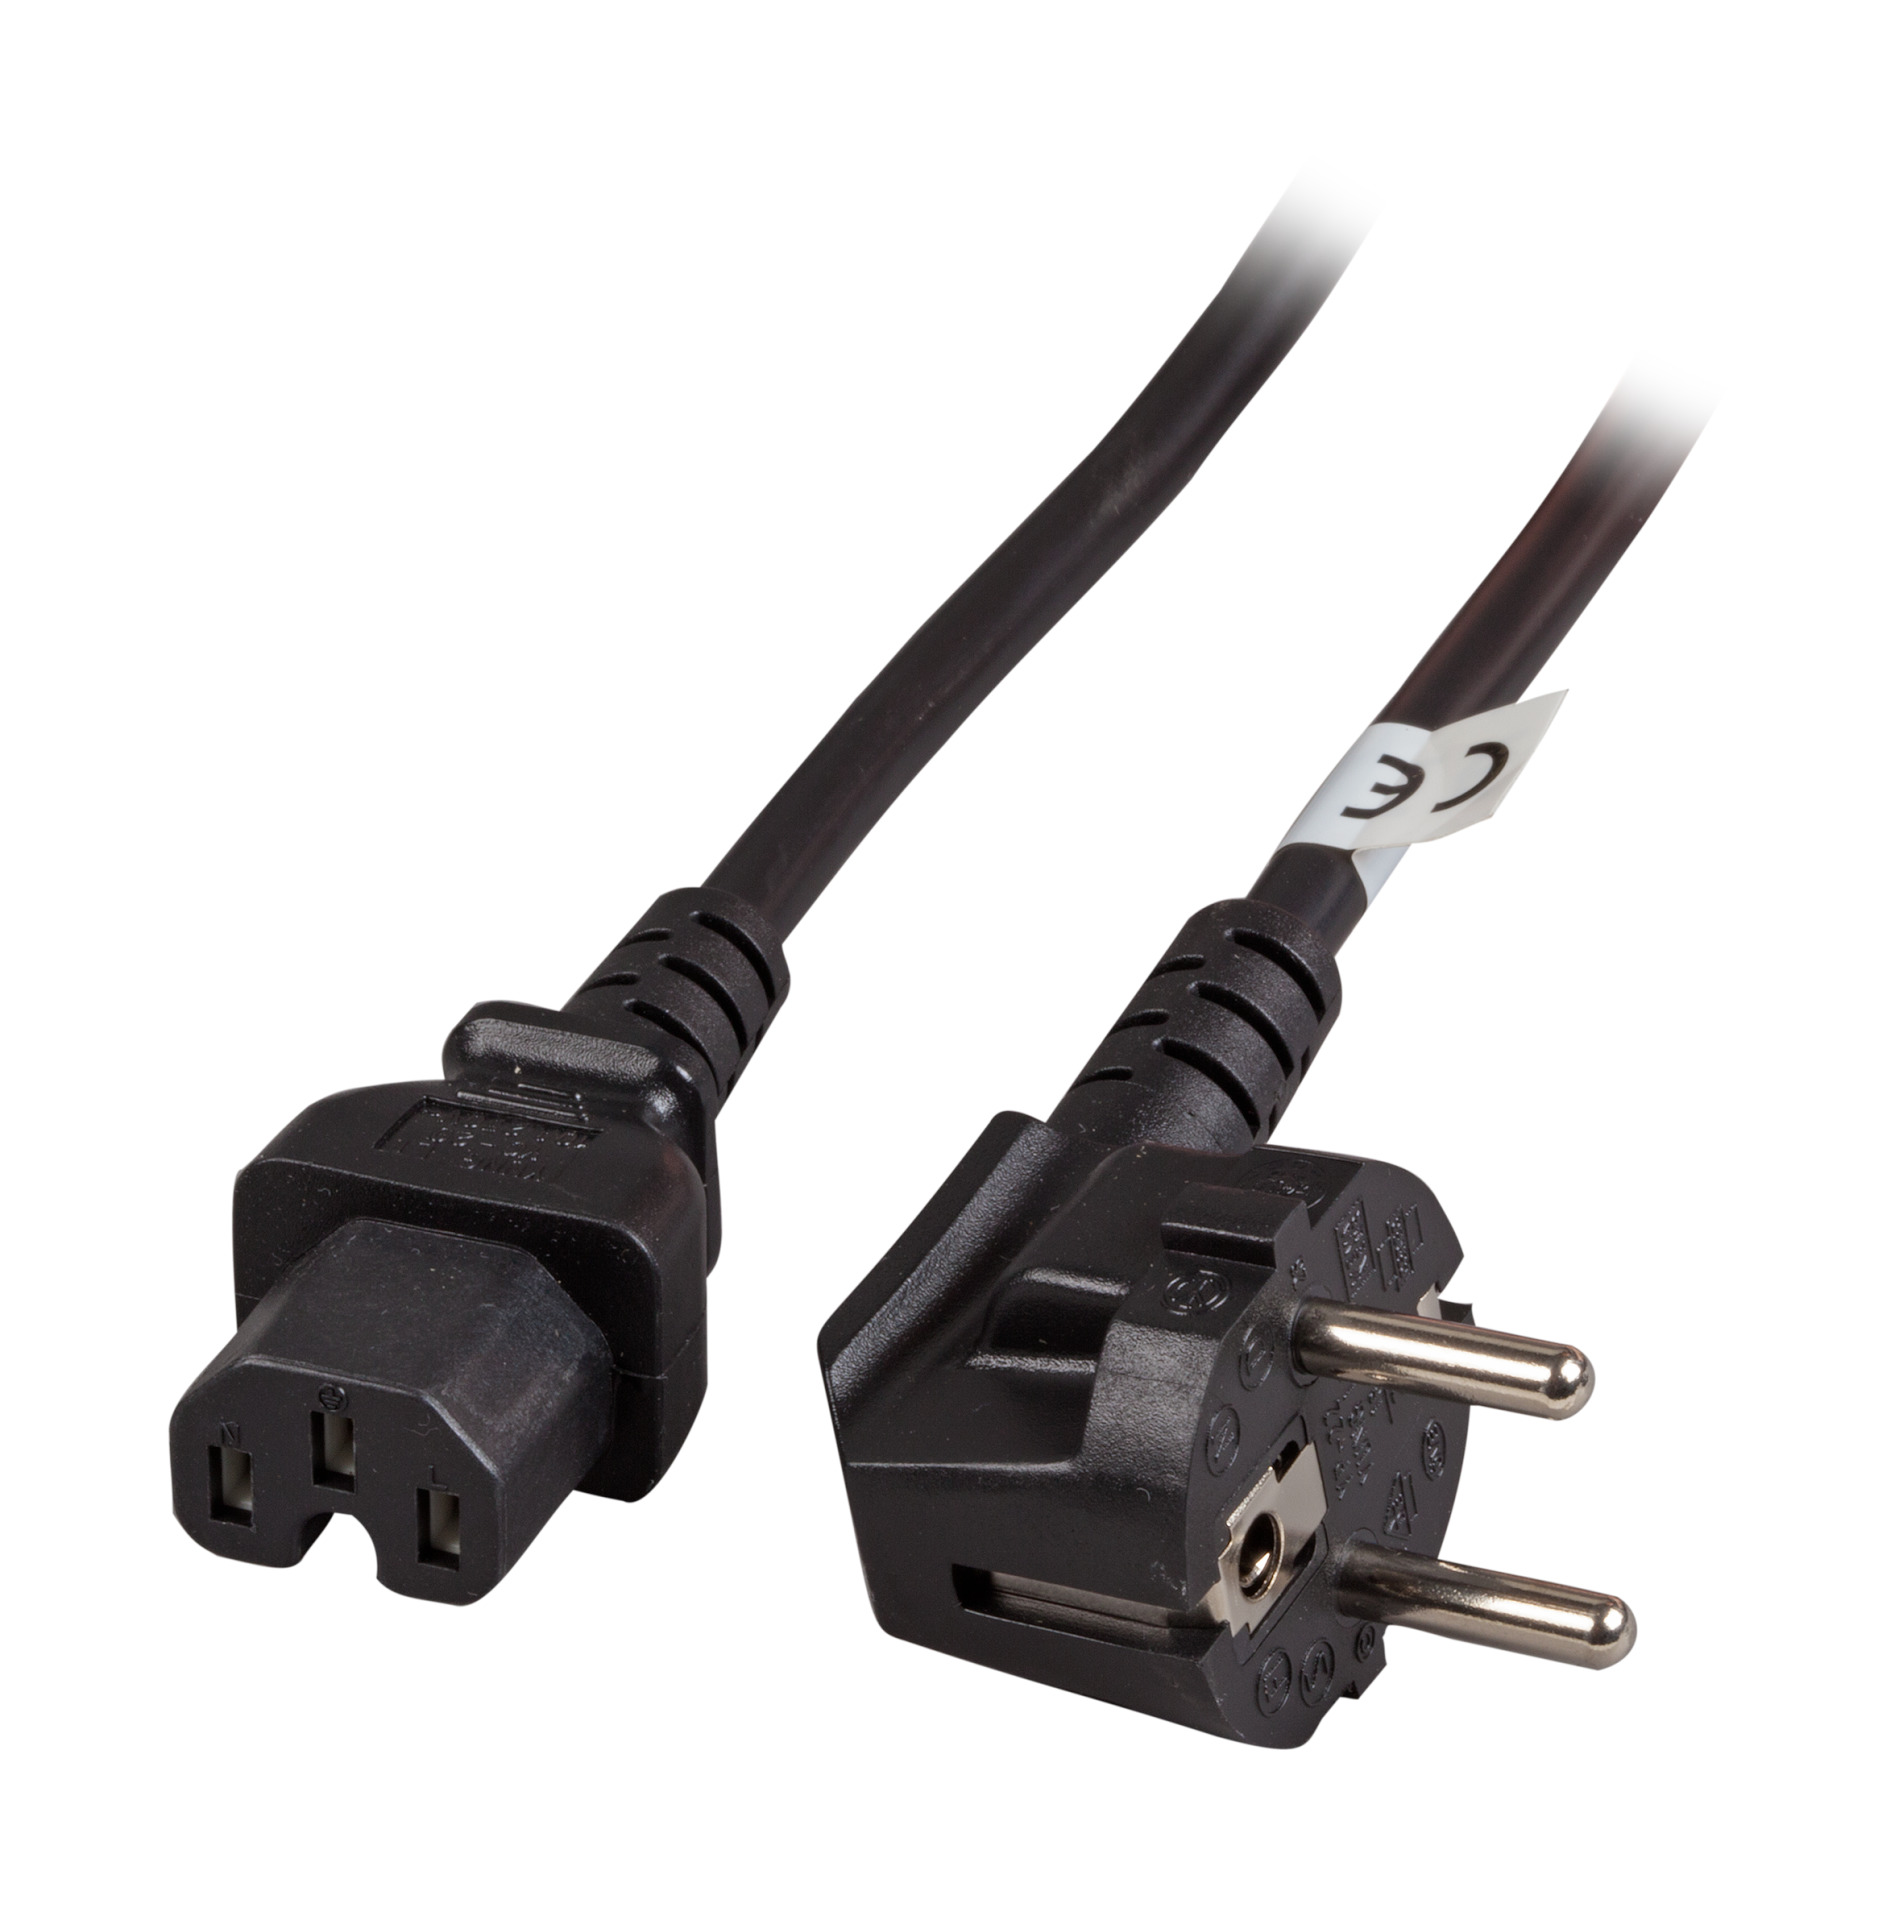 Power Cable CEE7/7 90° - C15 180°, Black, 1.8 m, 3 x 1.00 mm²